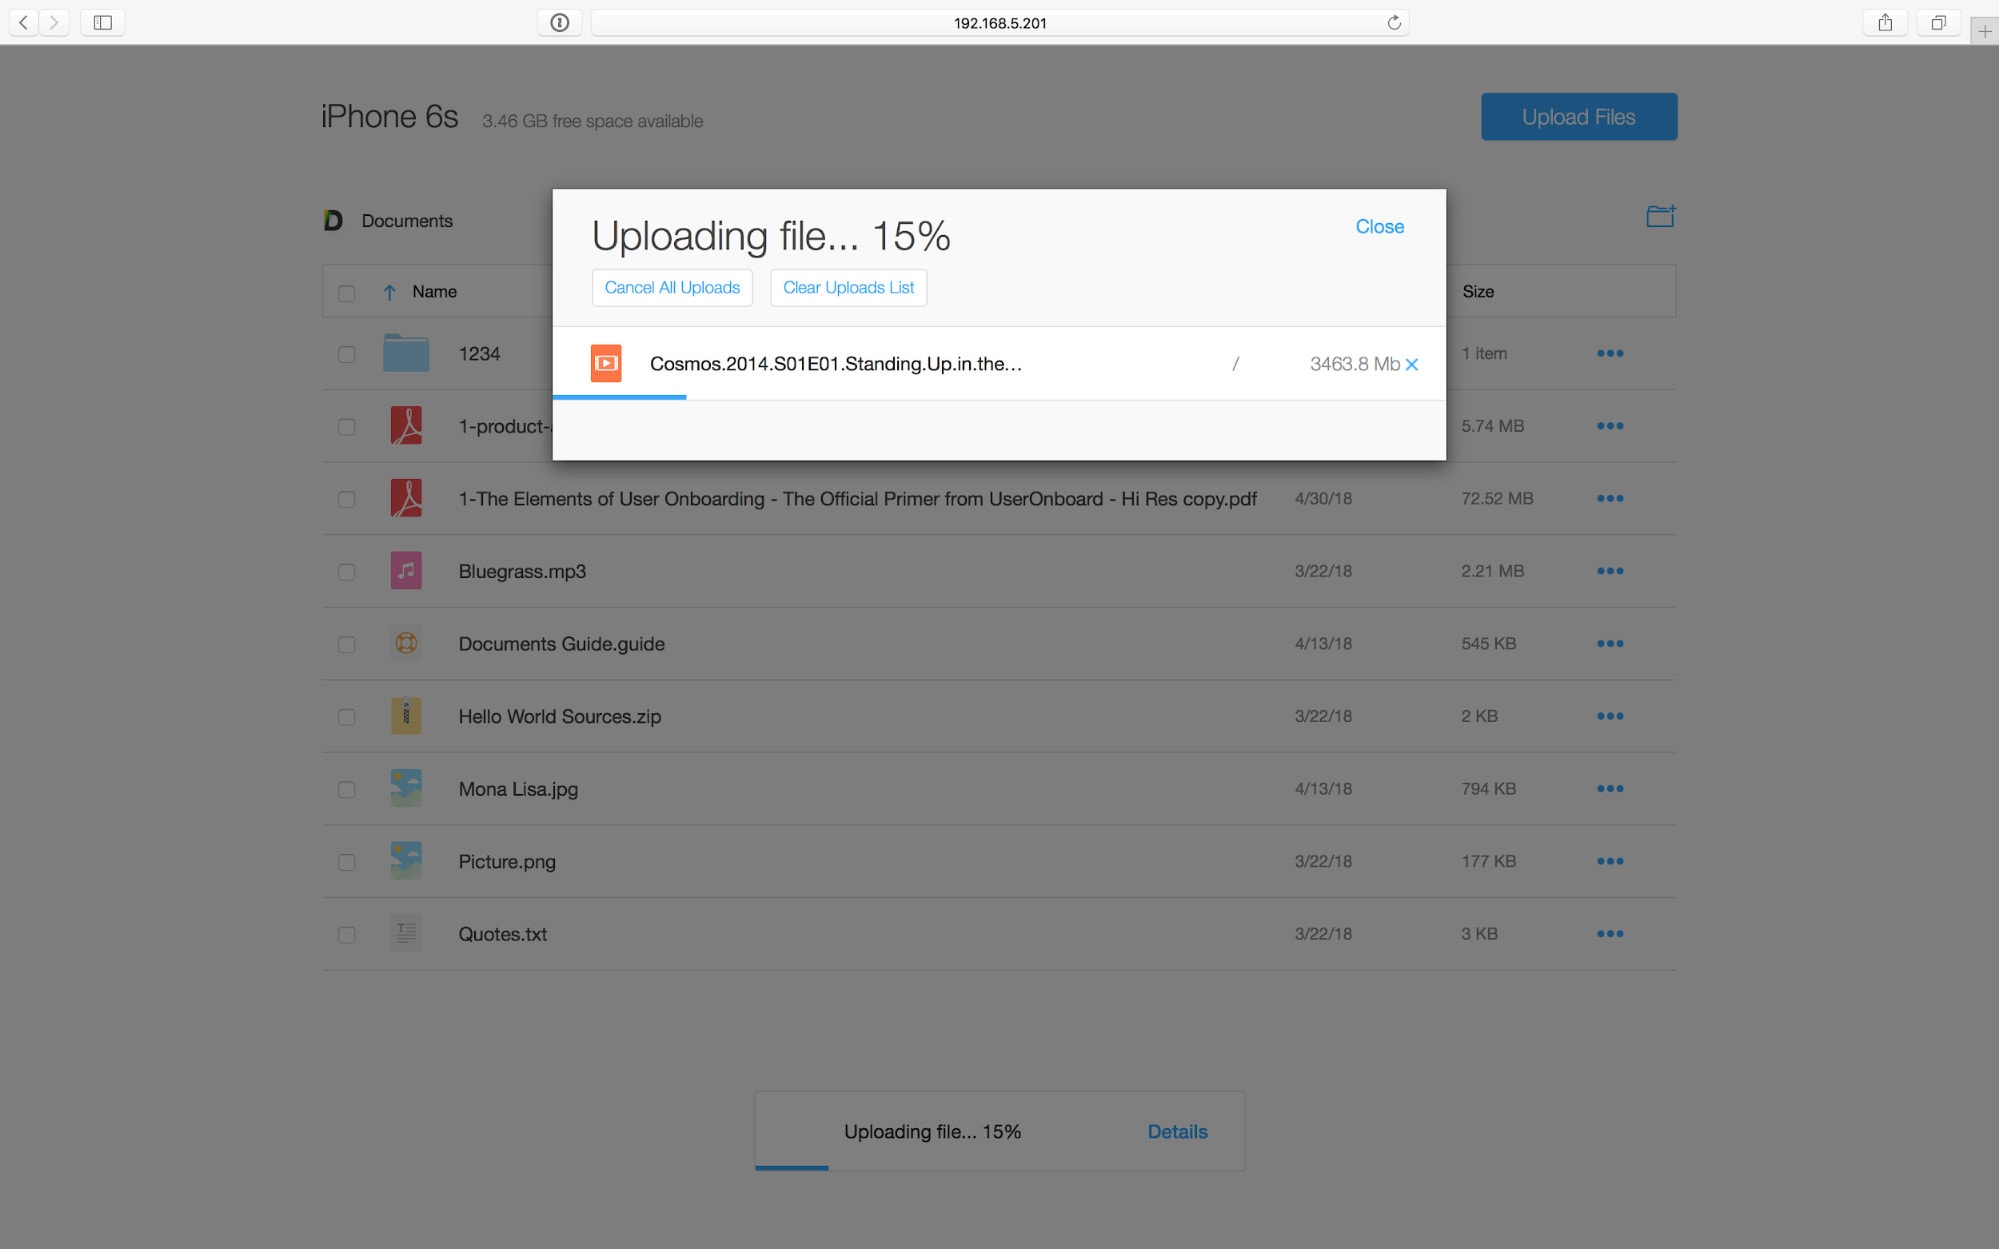 Send files to an iPad or iPhone with drag and drop.